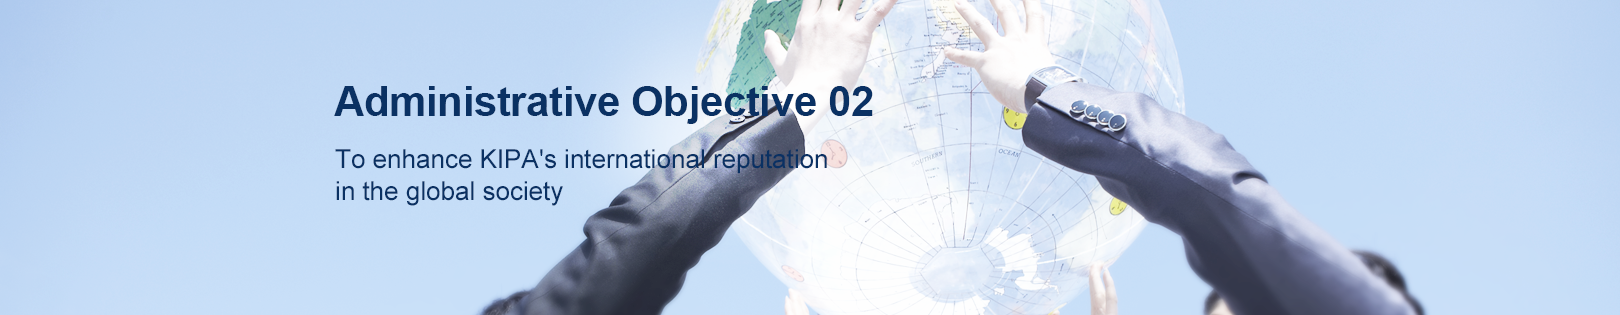 Managerial Objective 01.
Researching a plan for the improvement in the operation of administrative systems